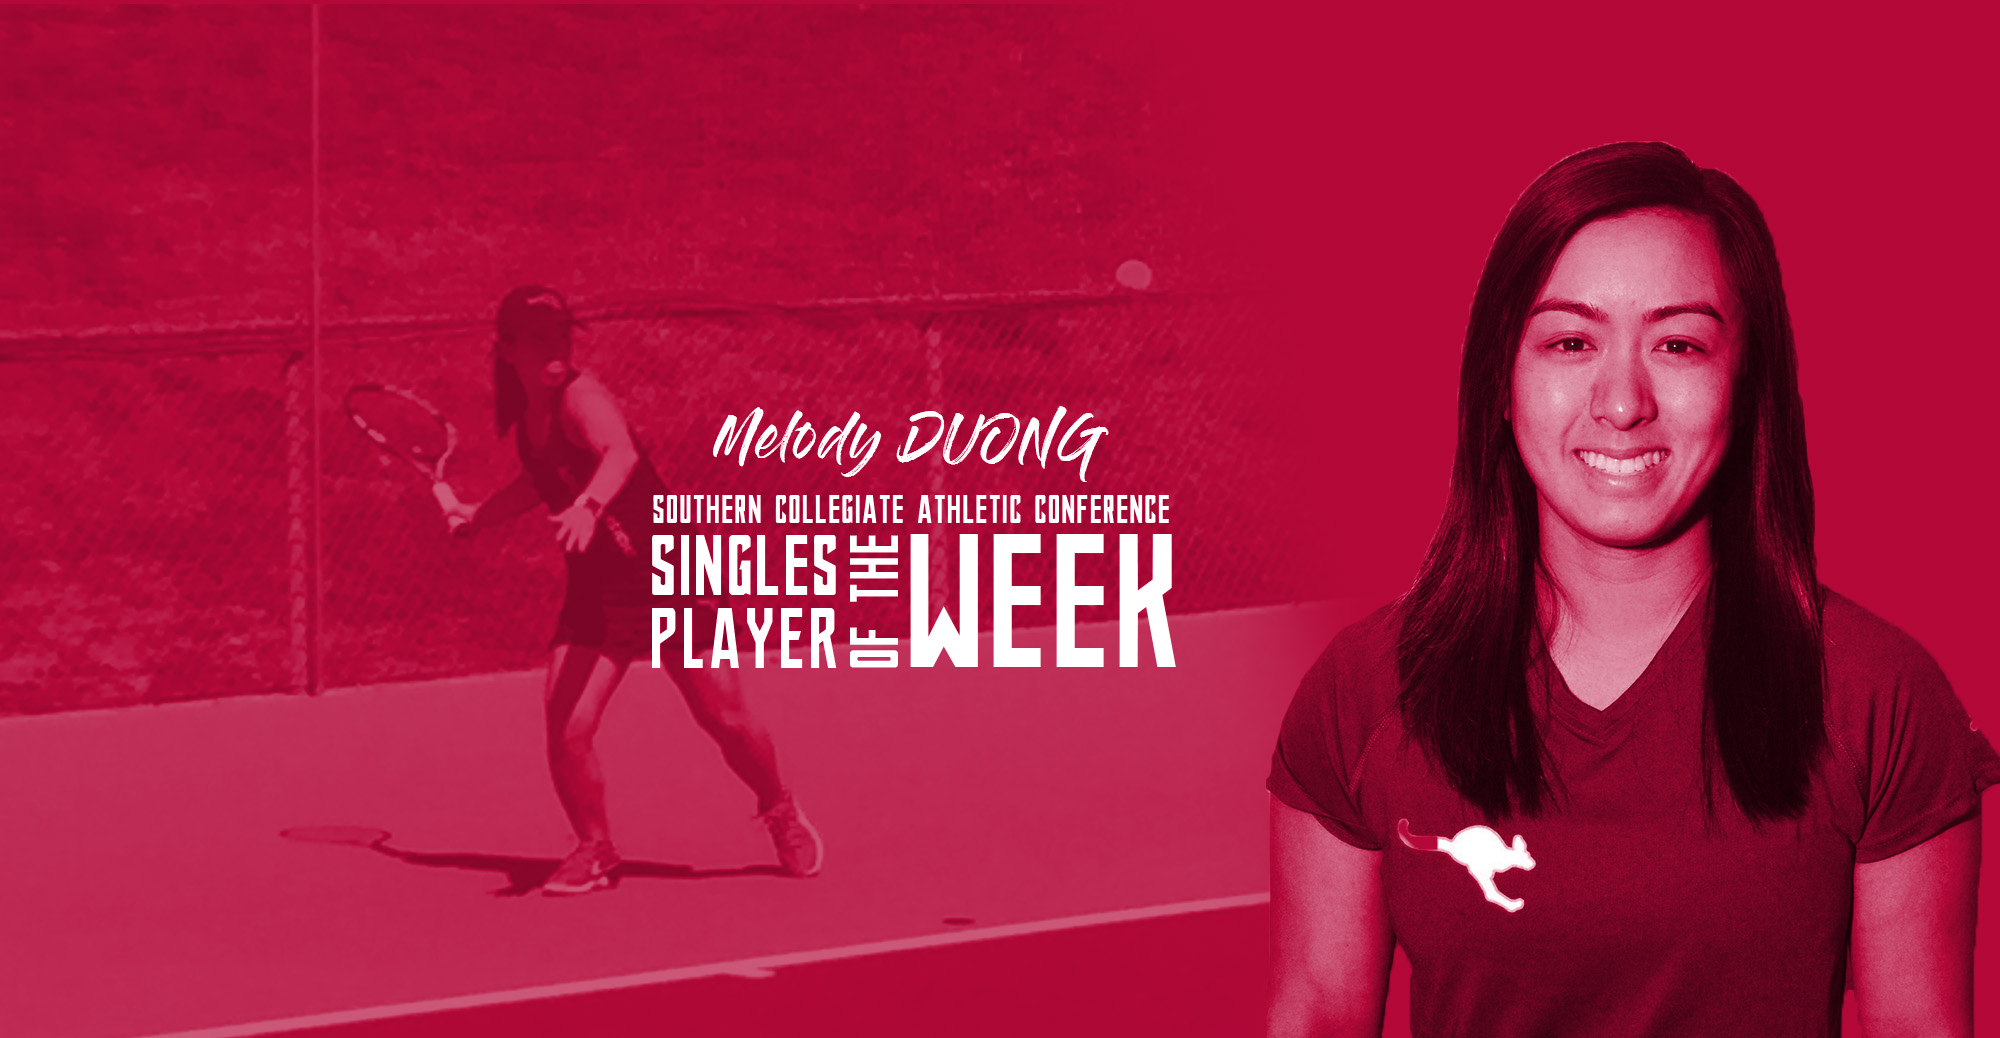 Duong Named SCAC Singles Player of the Week